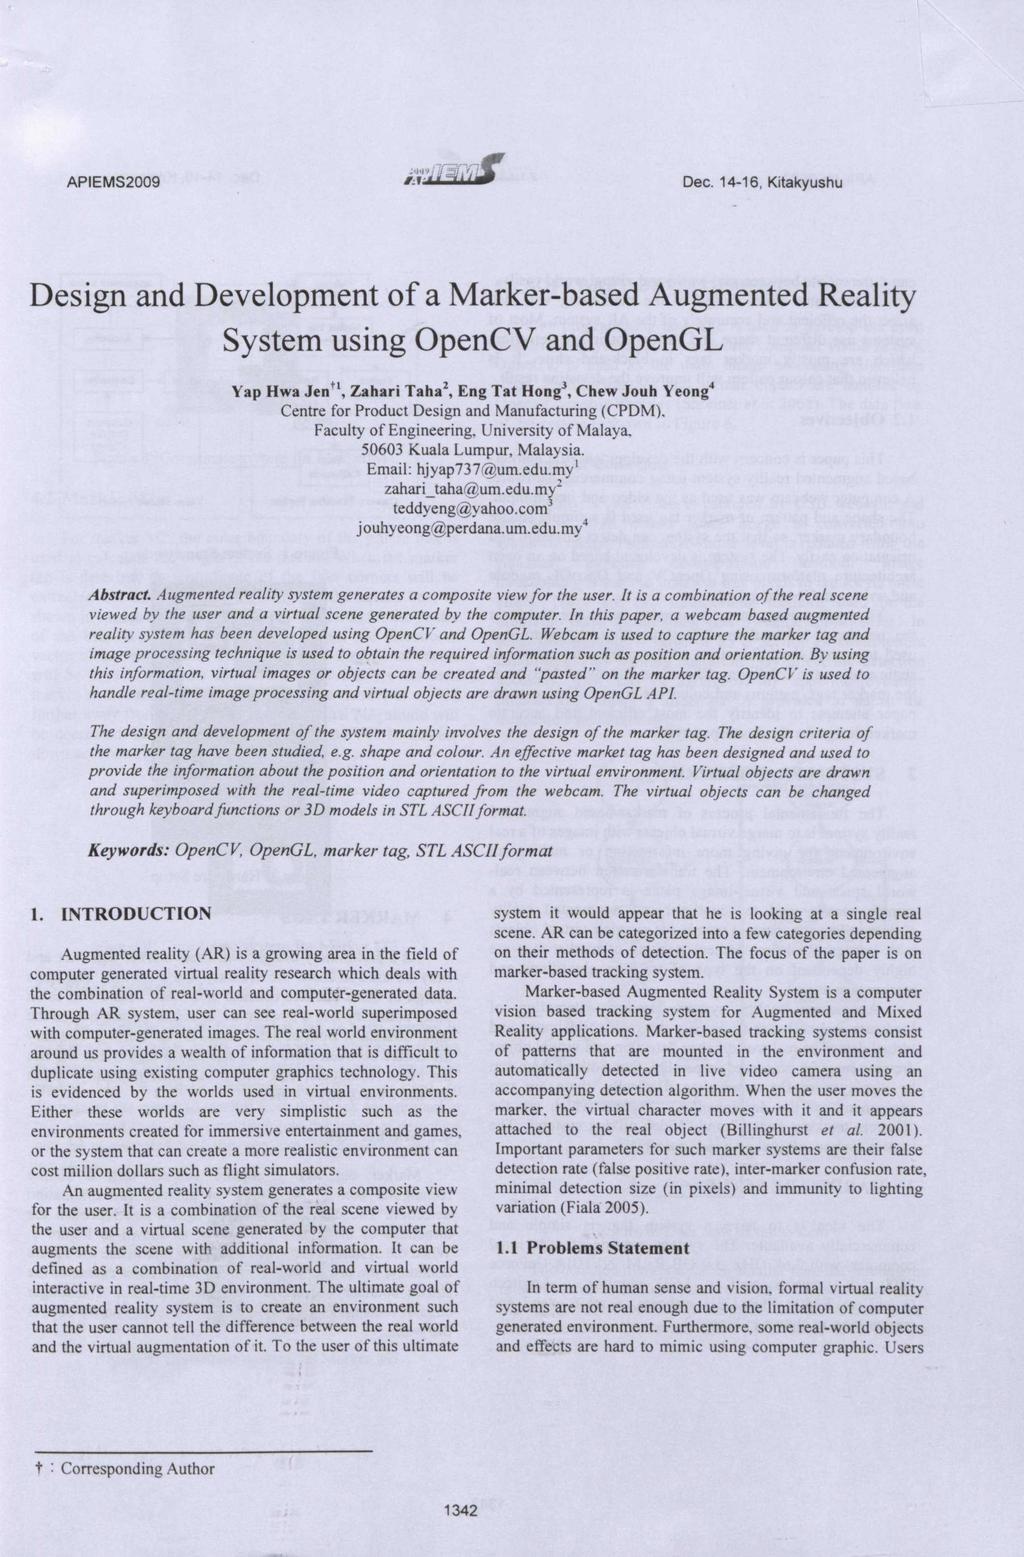 Design and Development of a Marker-based Augmented Reality System using OpenCV and OpenGL Yap Hwa Jentl, Zahari Taha 2, Eng Tat Hong", Chew Jouh Yeong" Centre for Product Design and Manufacturing